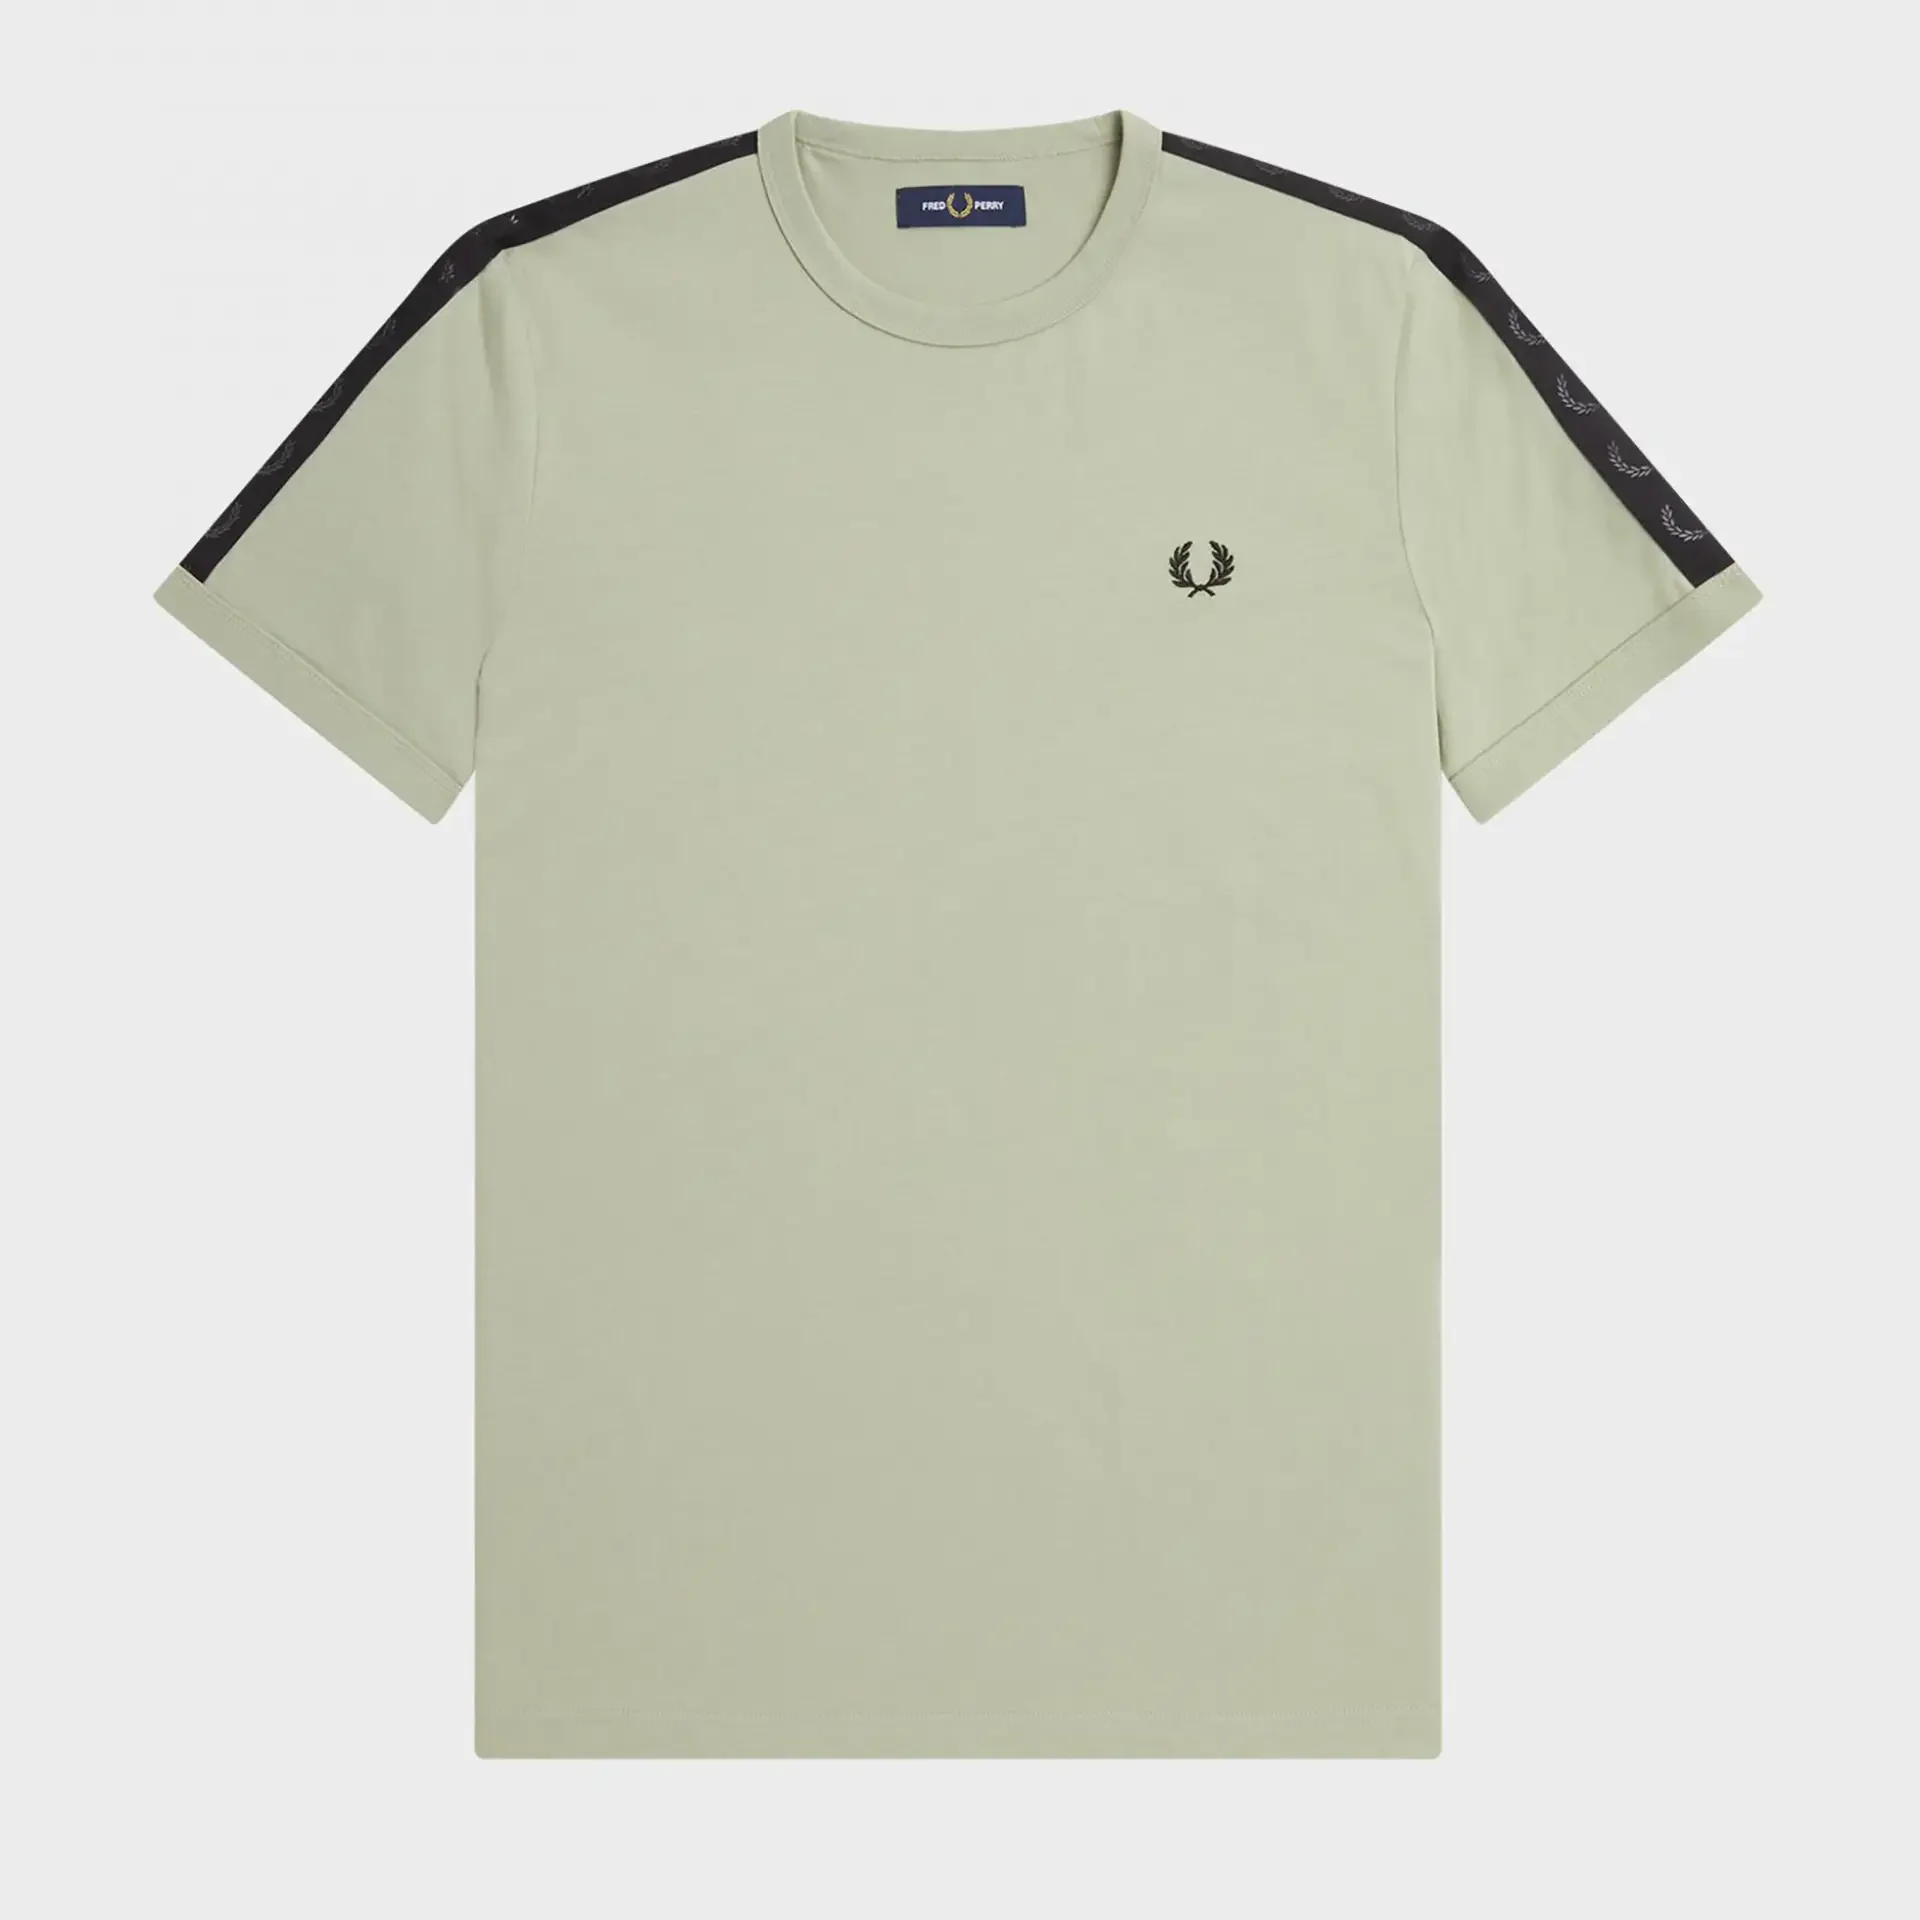 Fred Perry Tonal Tape Ringer T-Shirt Seagrass/Black